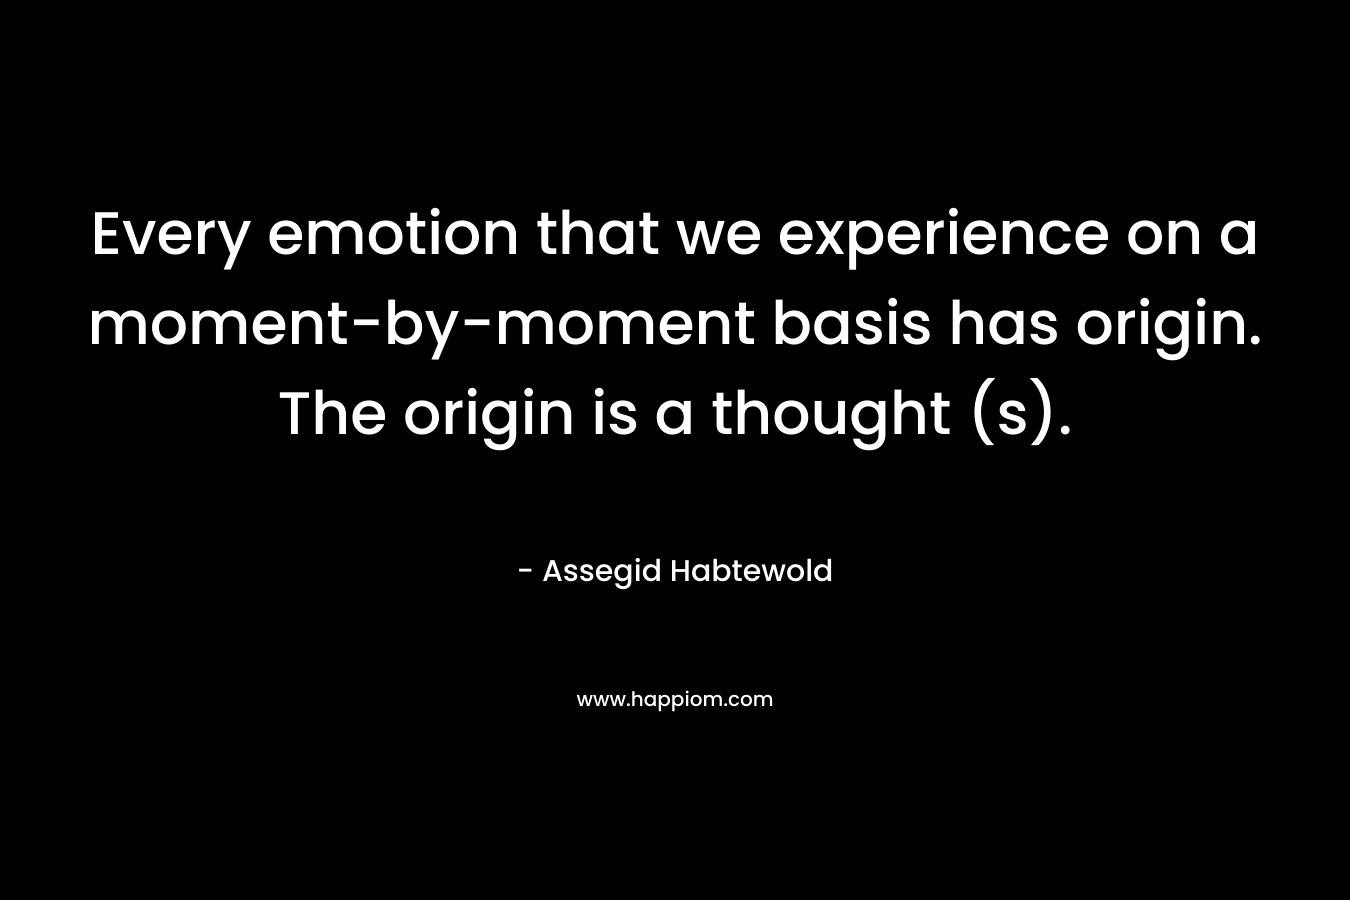 Every emotion that we experience on a moment-by-moment basis has origin. The origin is a thought (s). – Assegid Habtewold